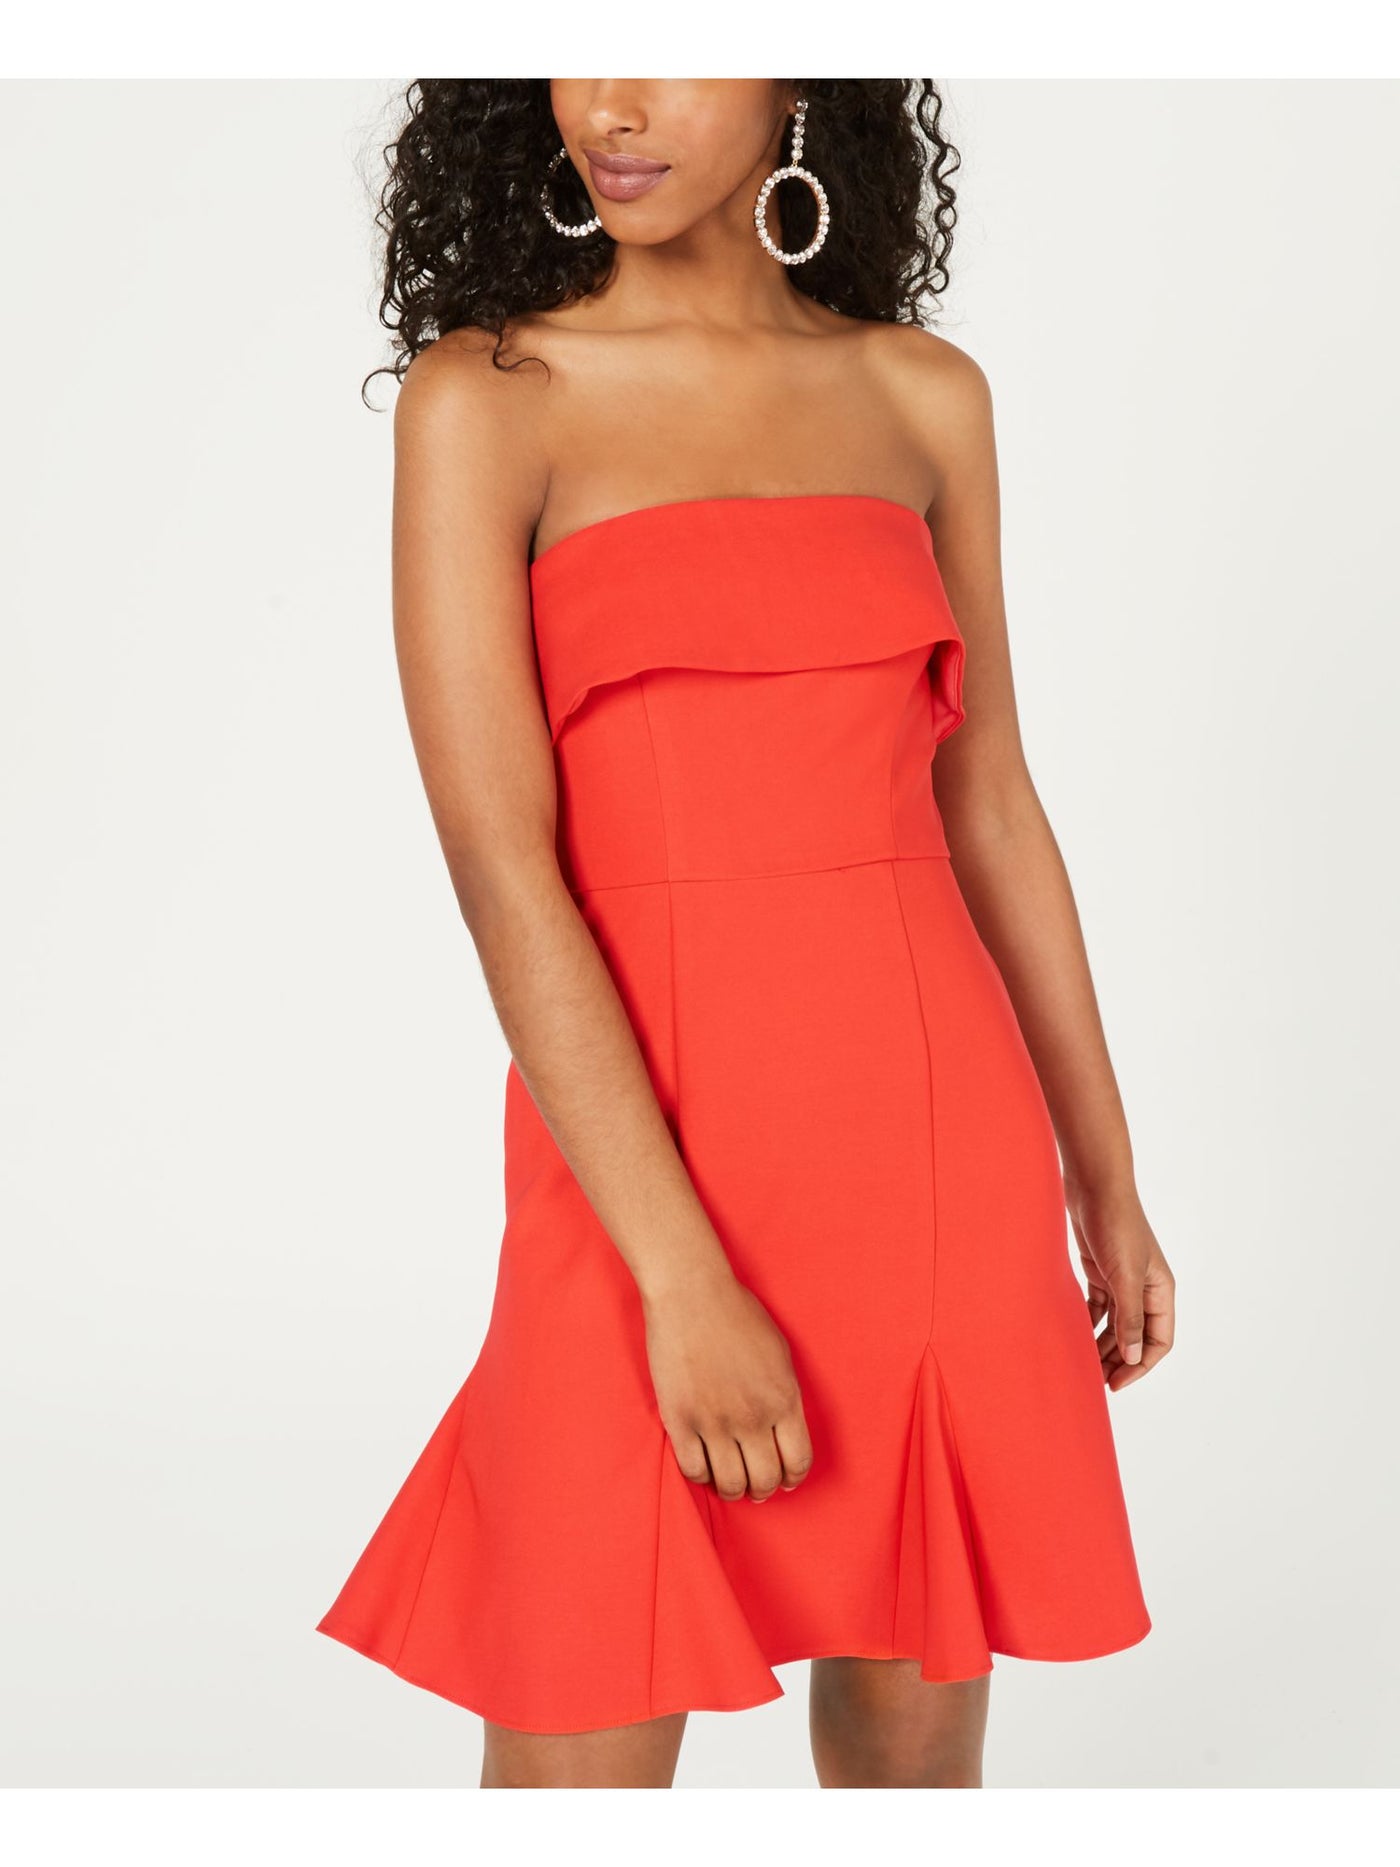 TEEZE ME Womens Red Sleeveless Strapless Above The Knee Cocktail Fit + Flare Dress Juniors 9\10